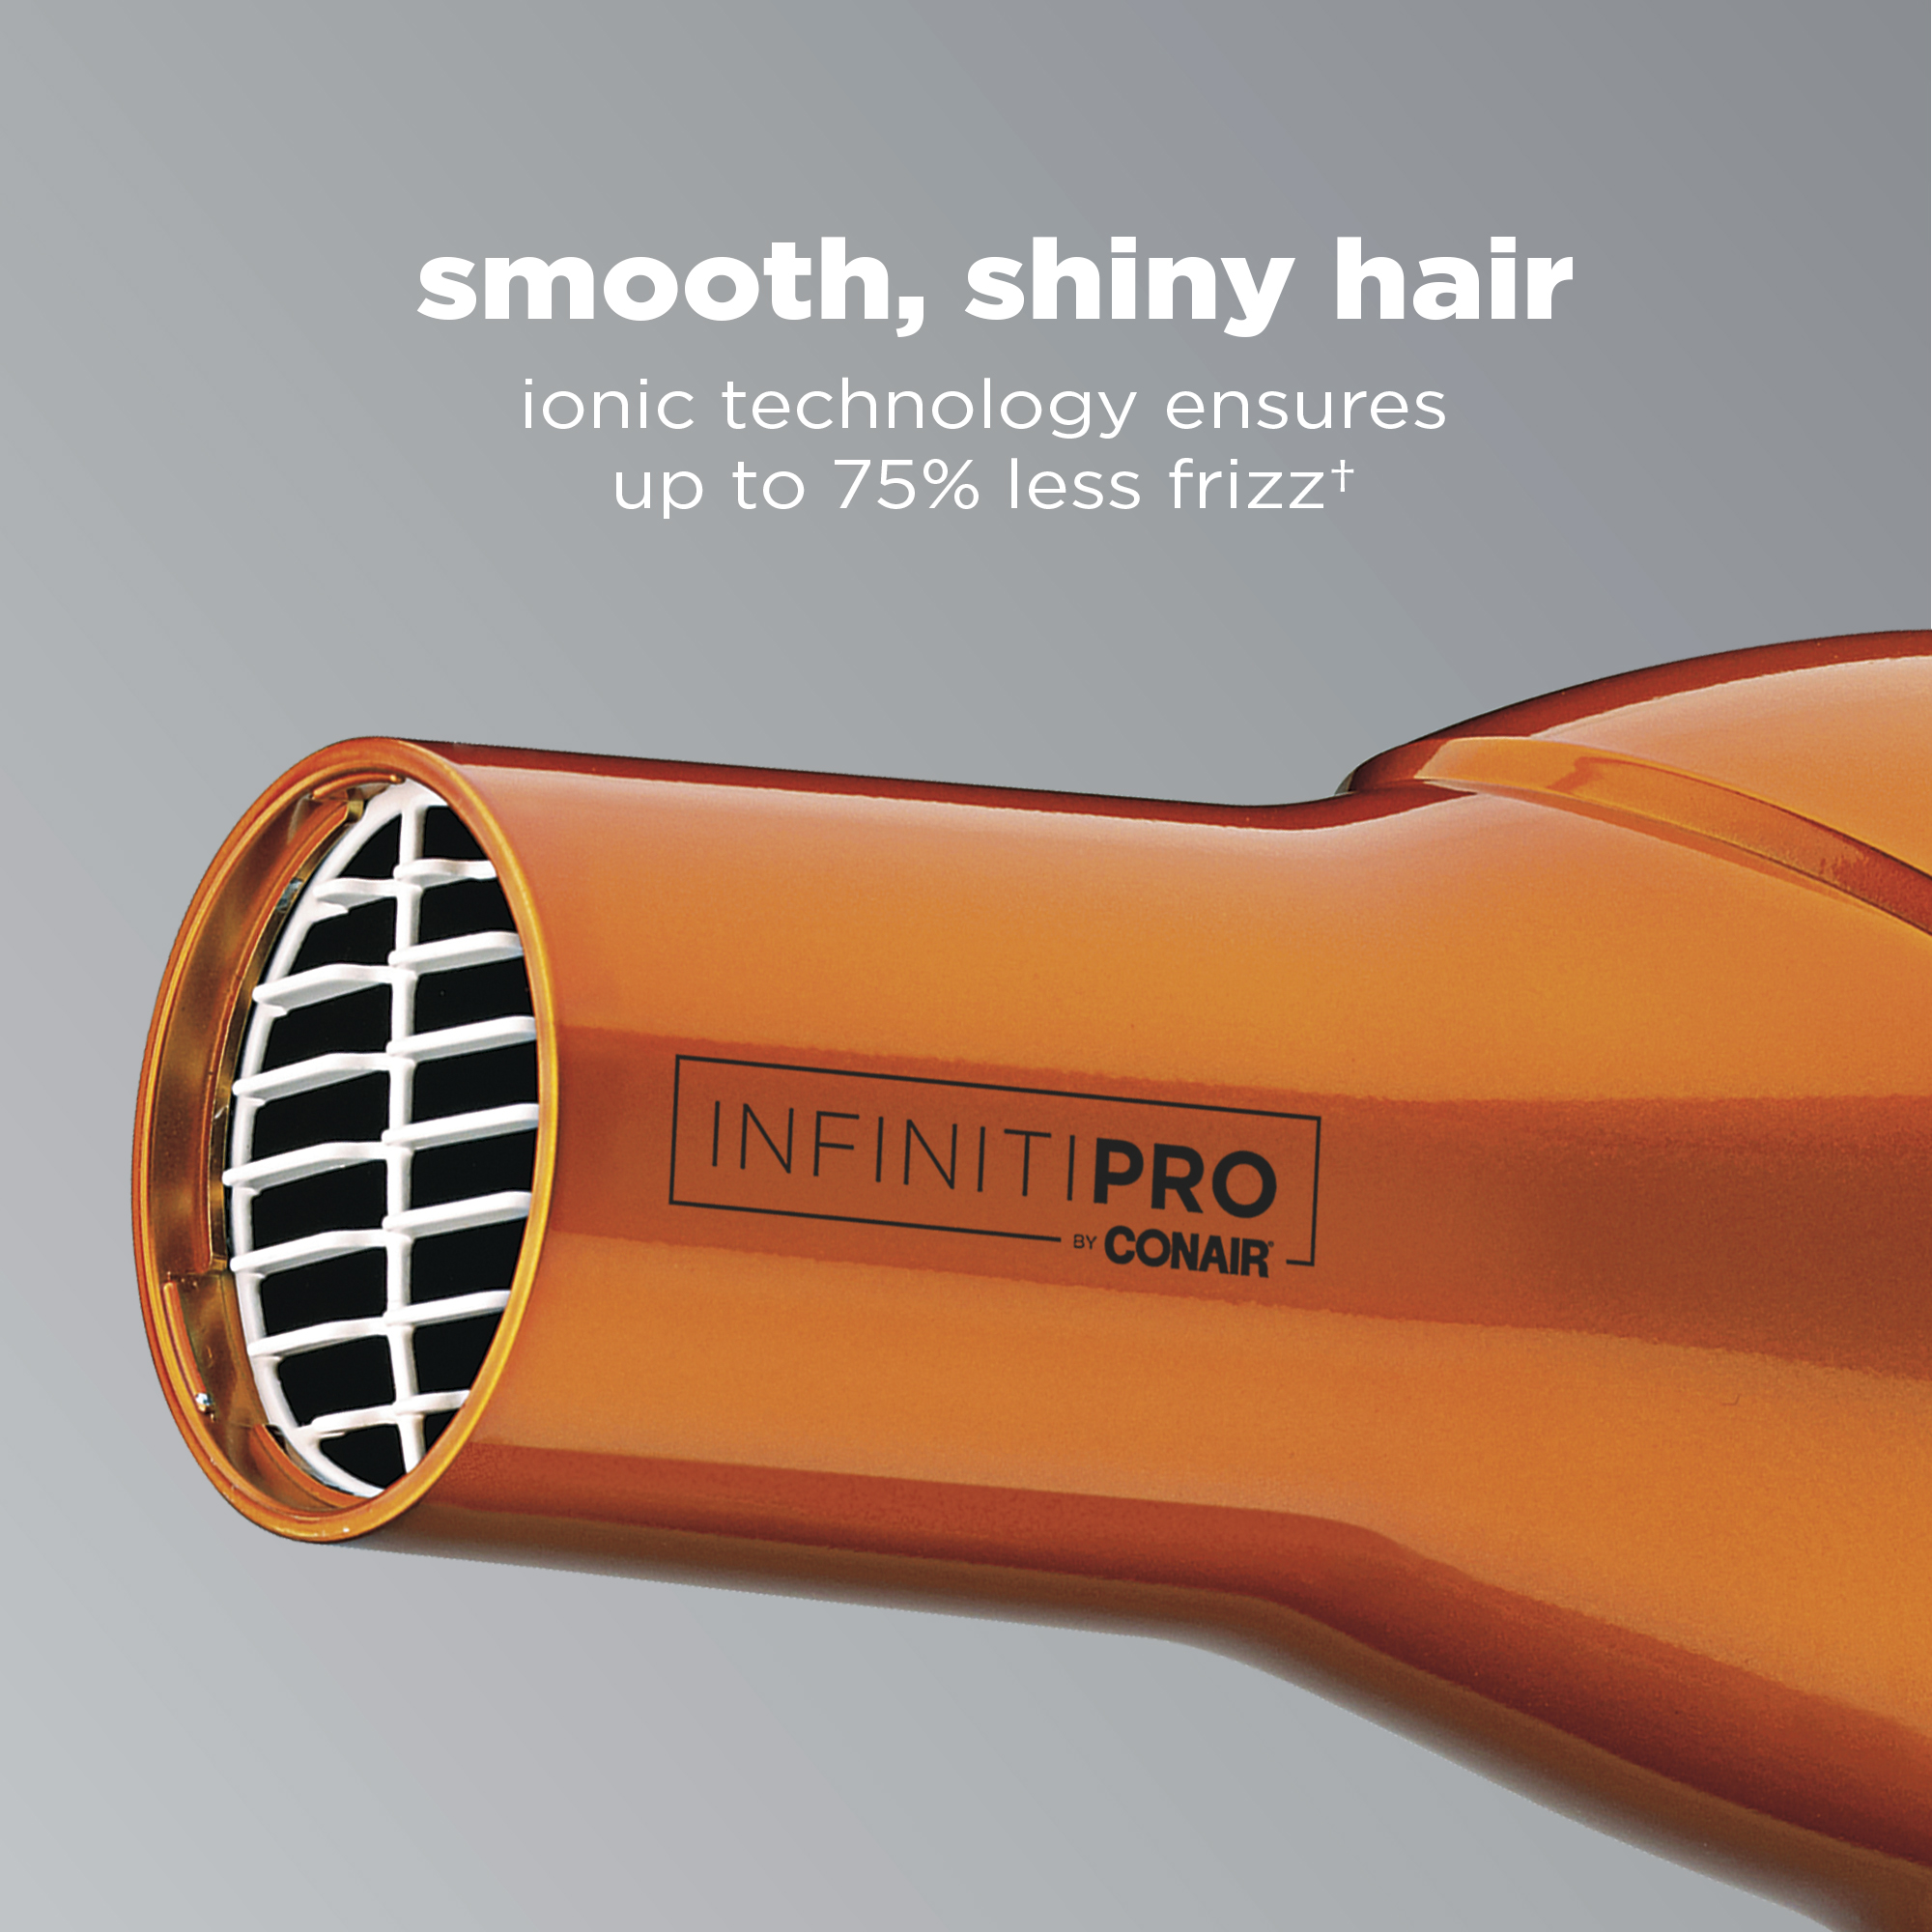 InfinitiPro by Conair Quick Styling Salon Professional Ionic & Ceramic Hair Dryer, 1875 Watts, Orange 259TPTY - image 3 of 7